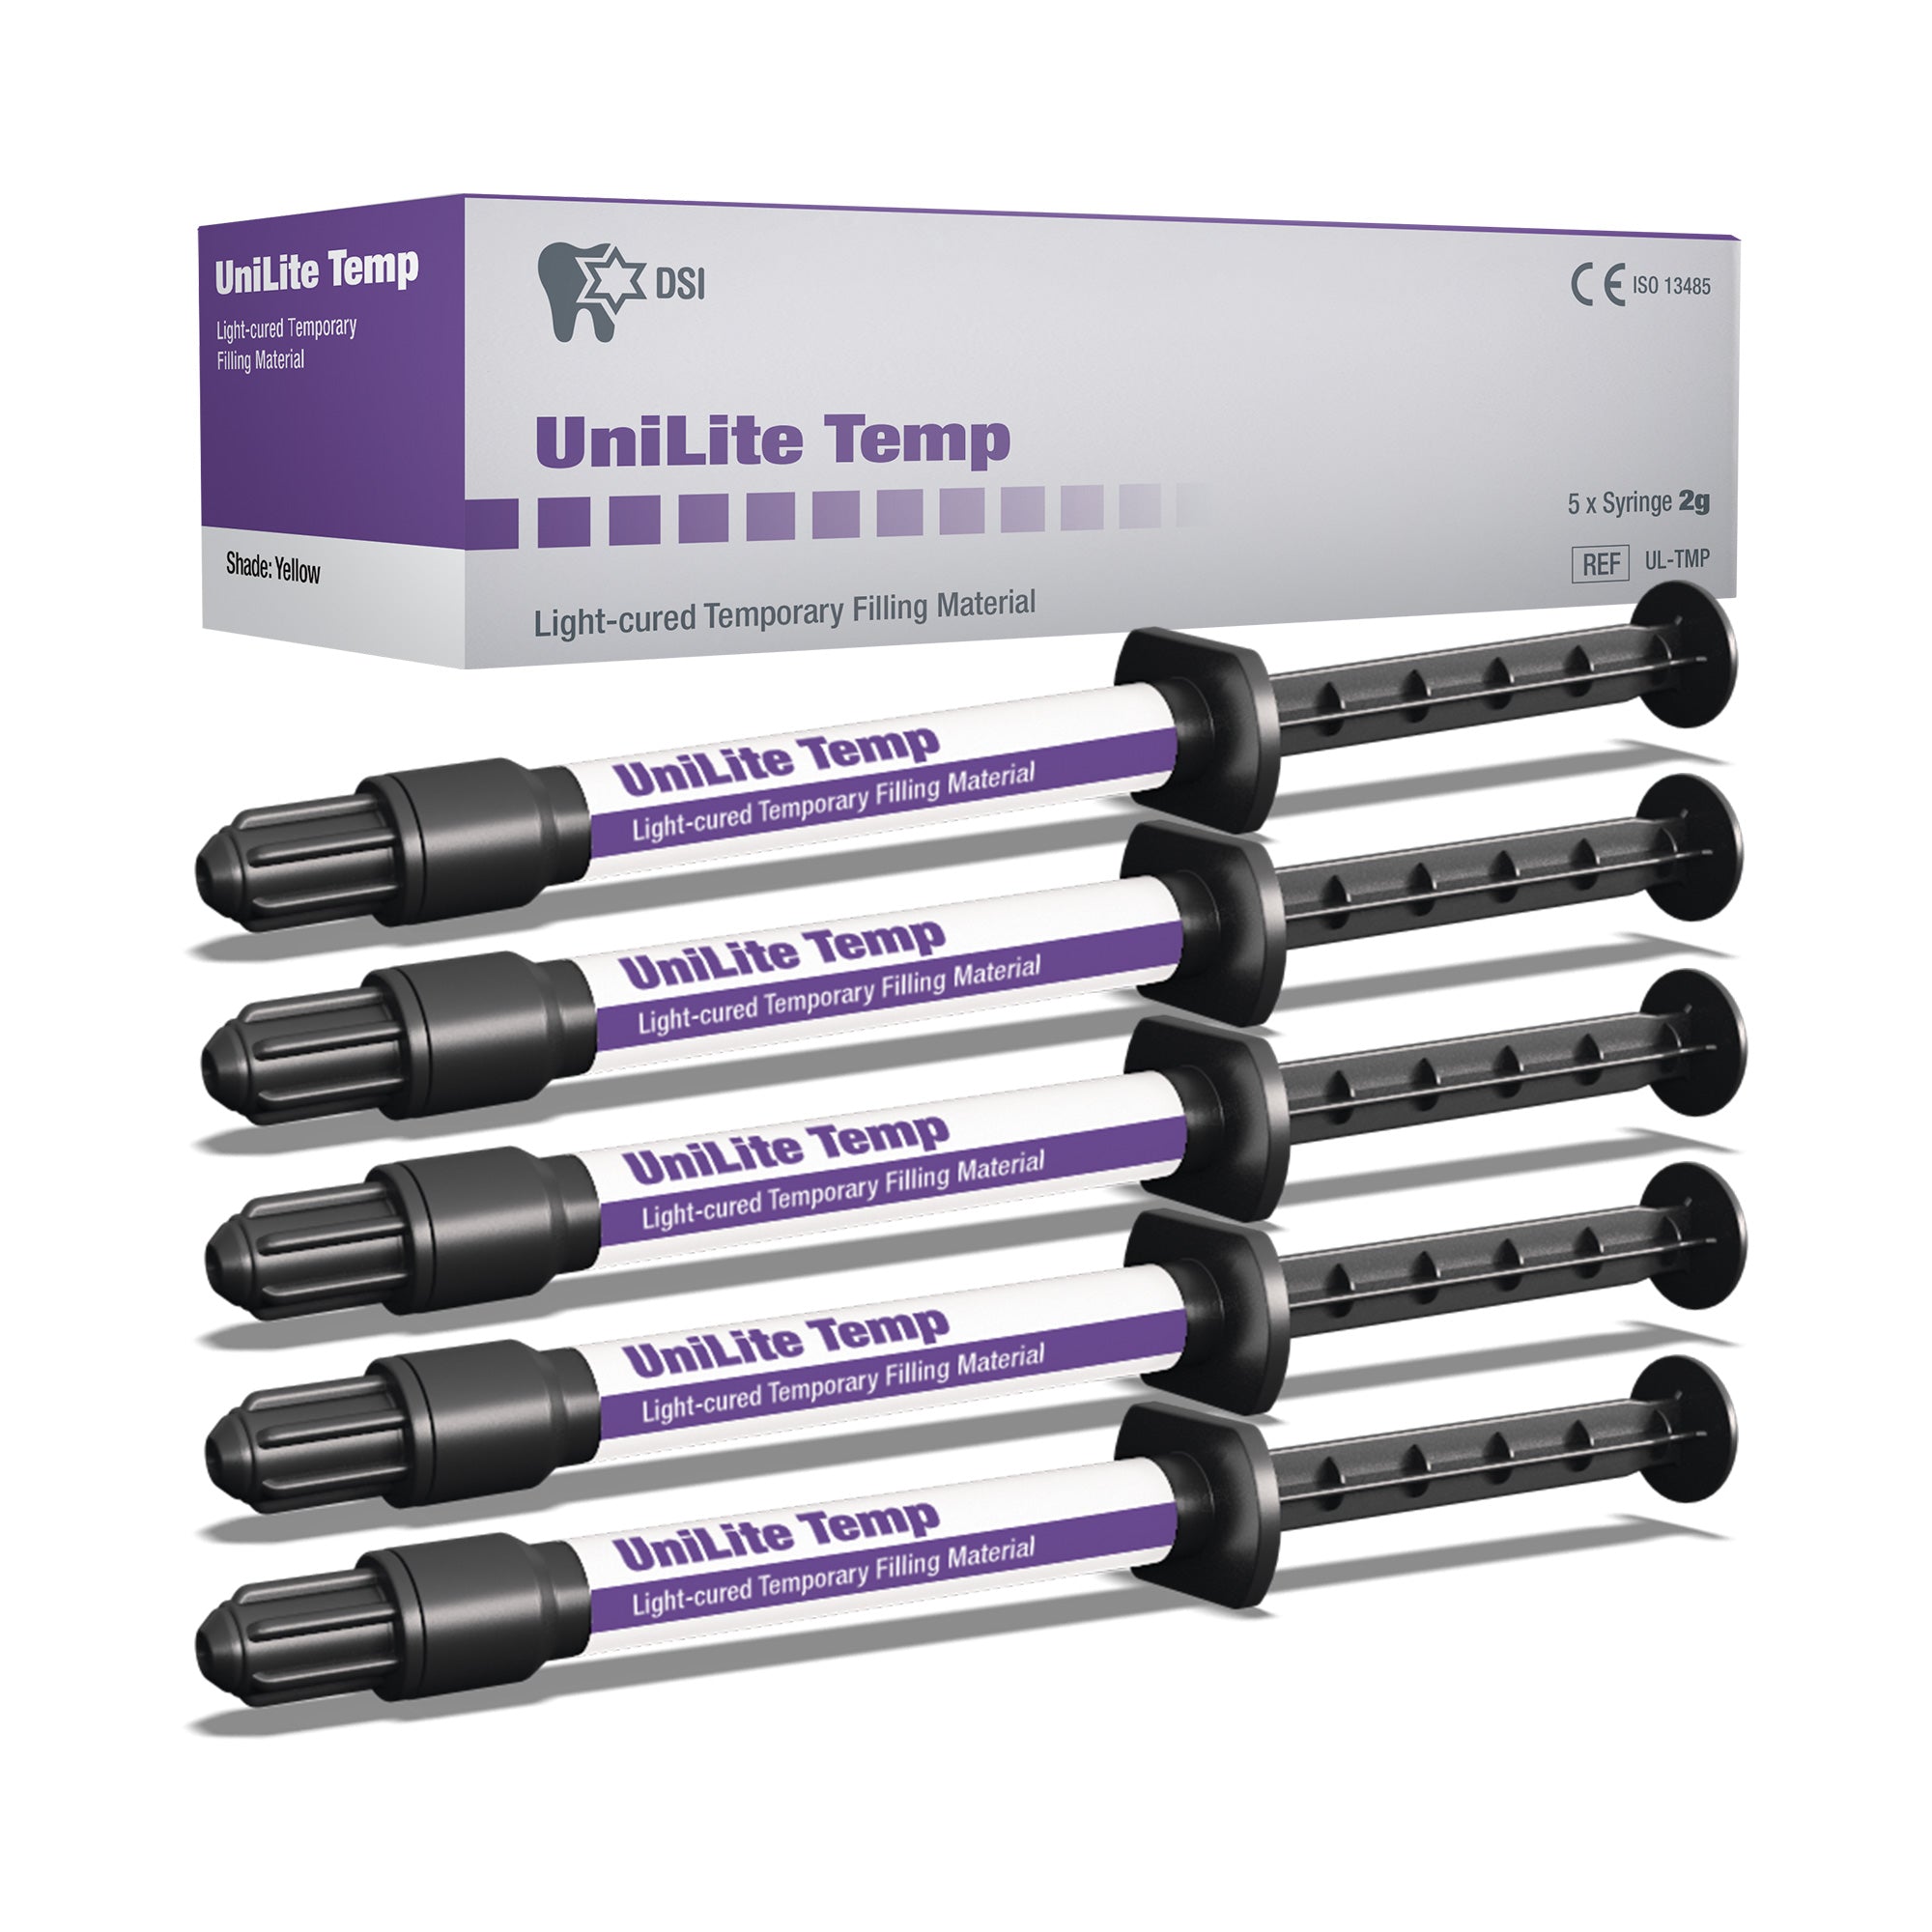 DSI UniLite Temp Light-cured Temporary Filling Material In Syringe 5x2g each